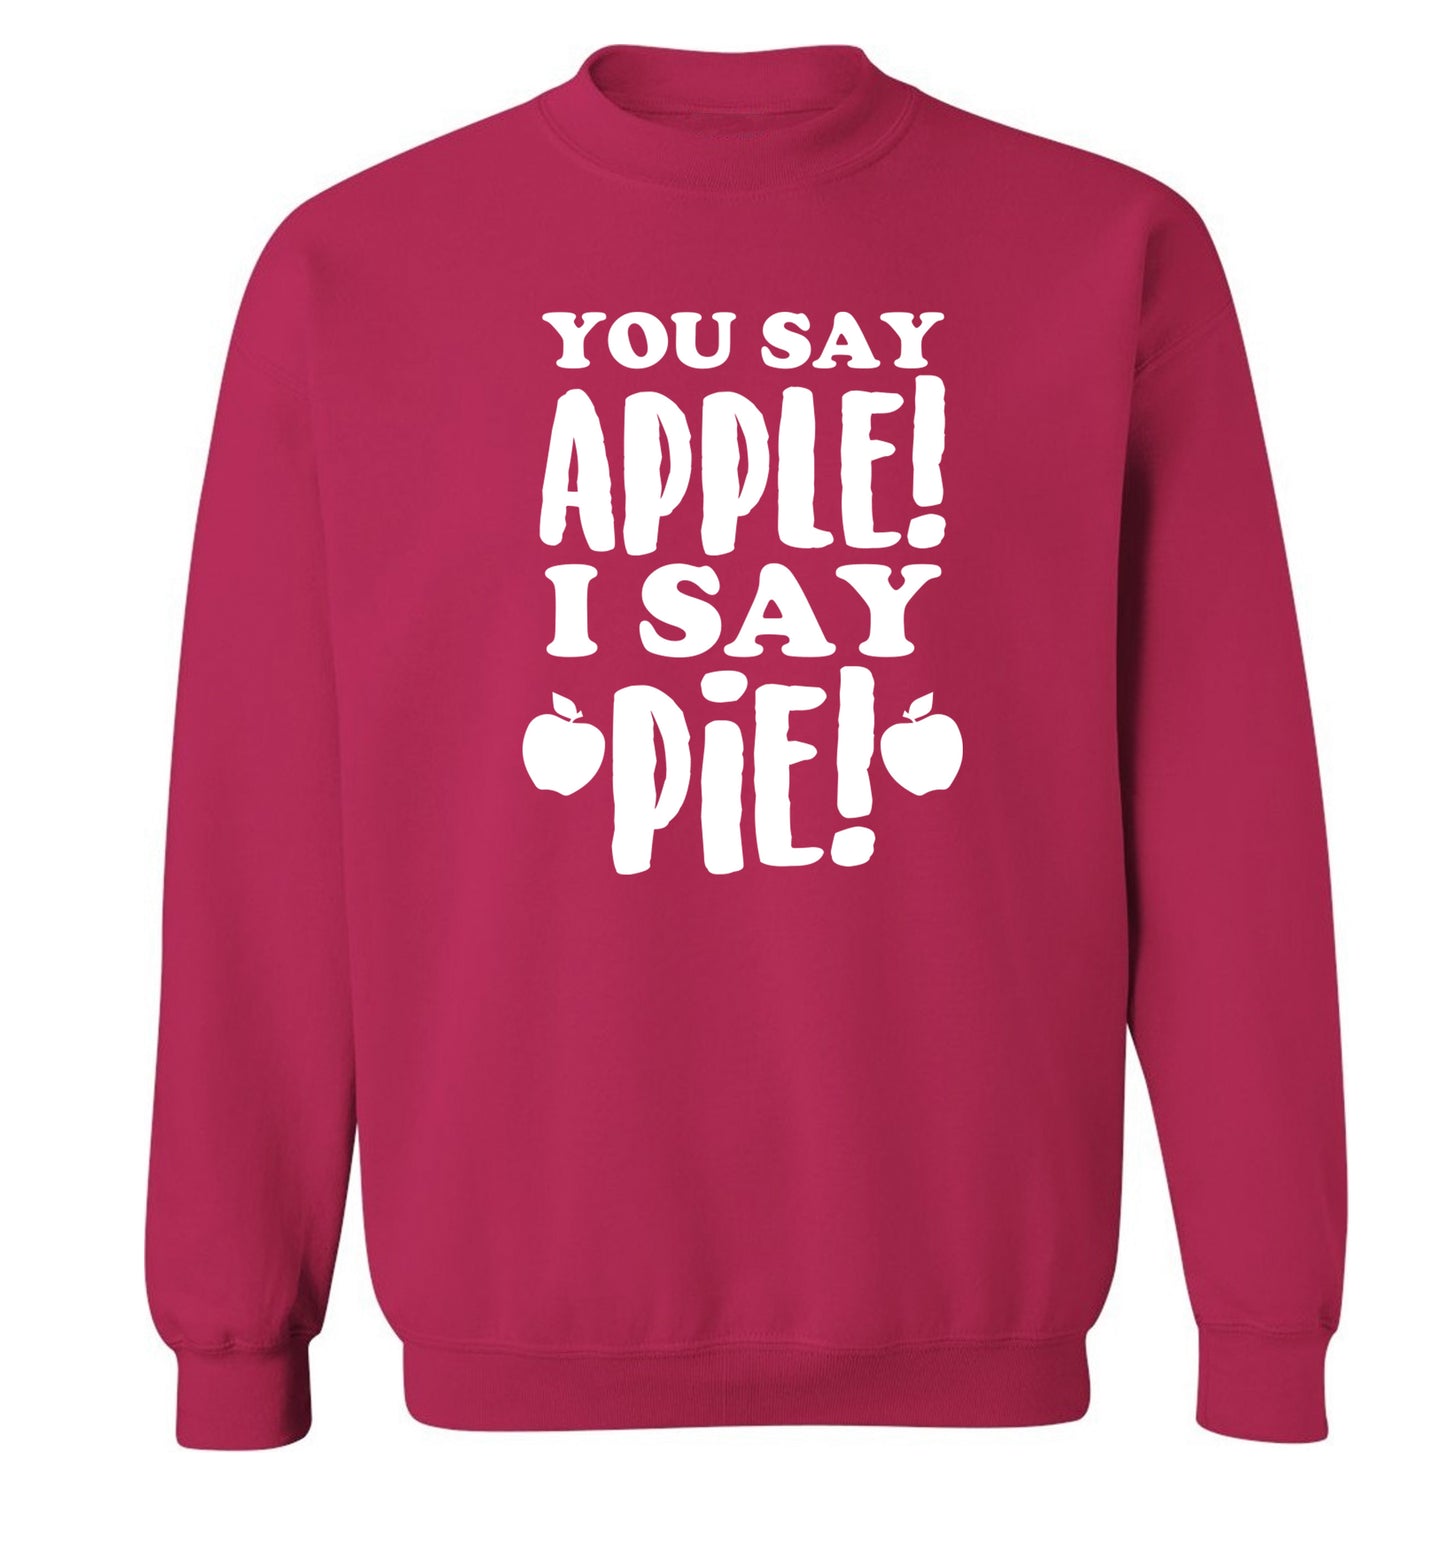 You say apple I say pie! Adult's unisex pink Sweater 2XL